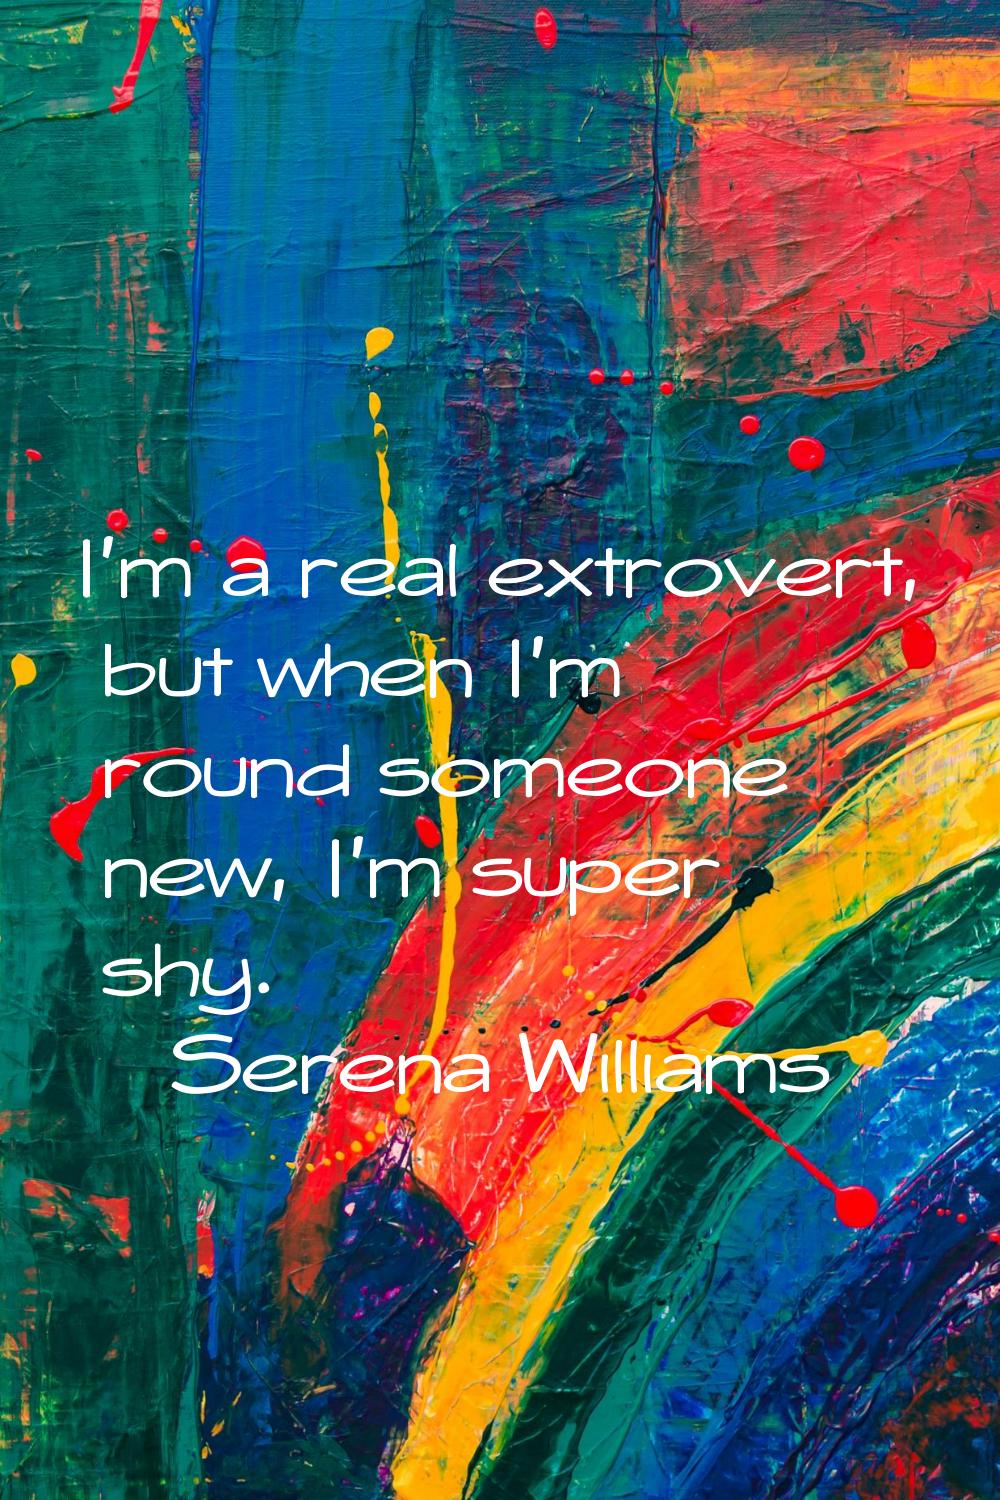 I'm a real extrovert, but when I'm round someone new, I'm super shy.